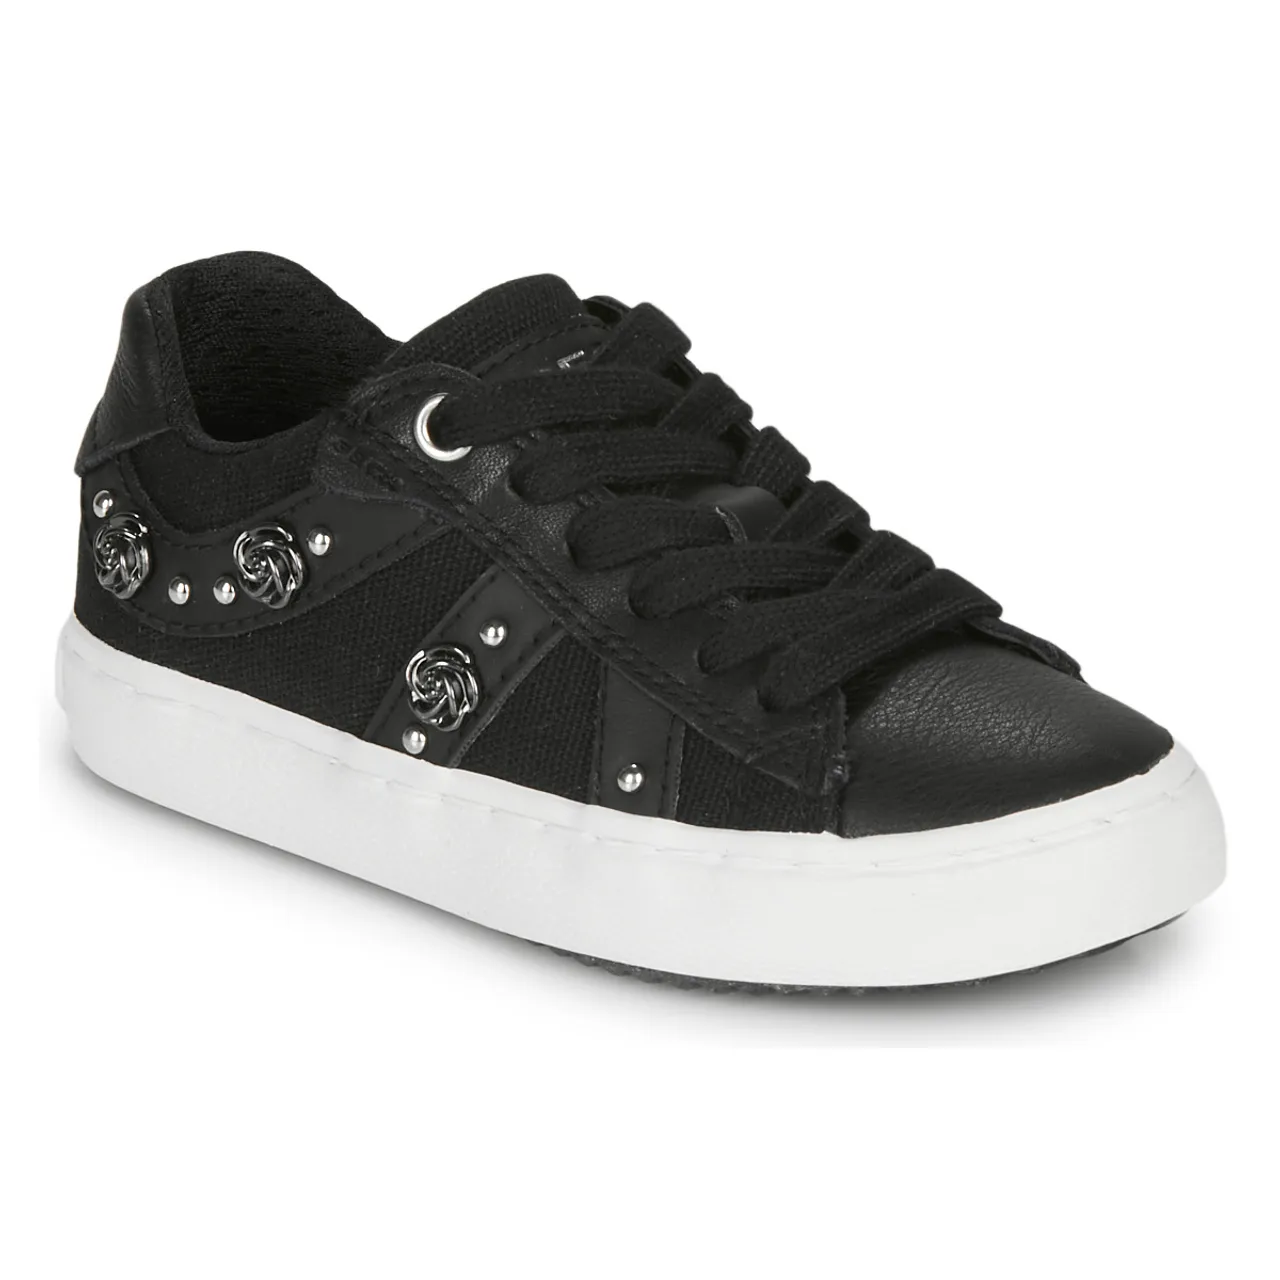 Geox  J KILWI GIRL  girls's Children's Shoes (Trainers) in Black